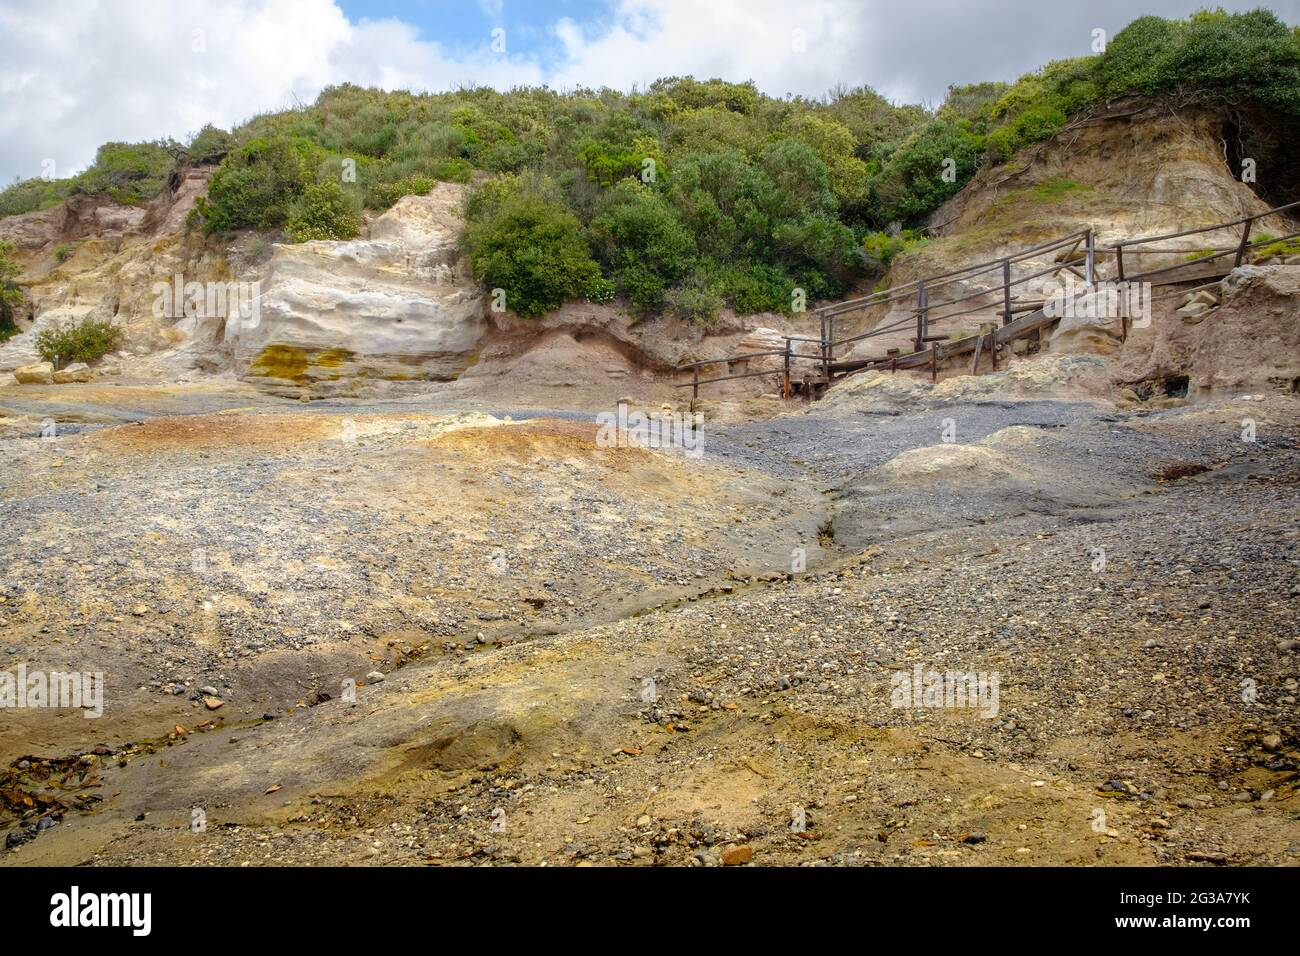 Detailed view of a sulfur mine so-called solfatara yellow rocks inside natural reserve of Tor Caldara in Lavinio, Anzio, Rome, Italy Stock Photo